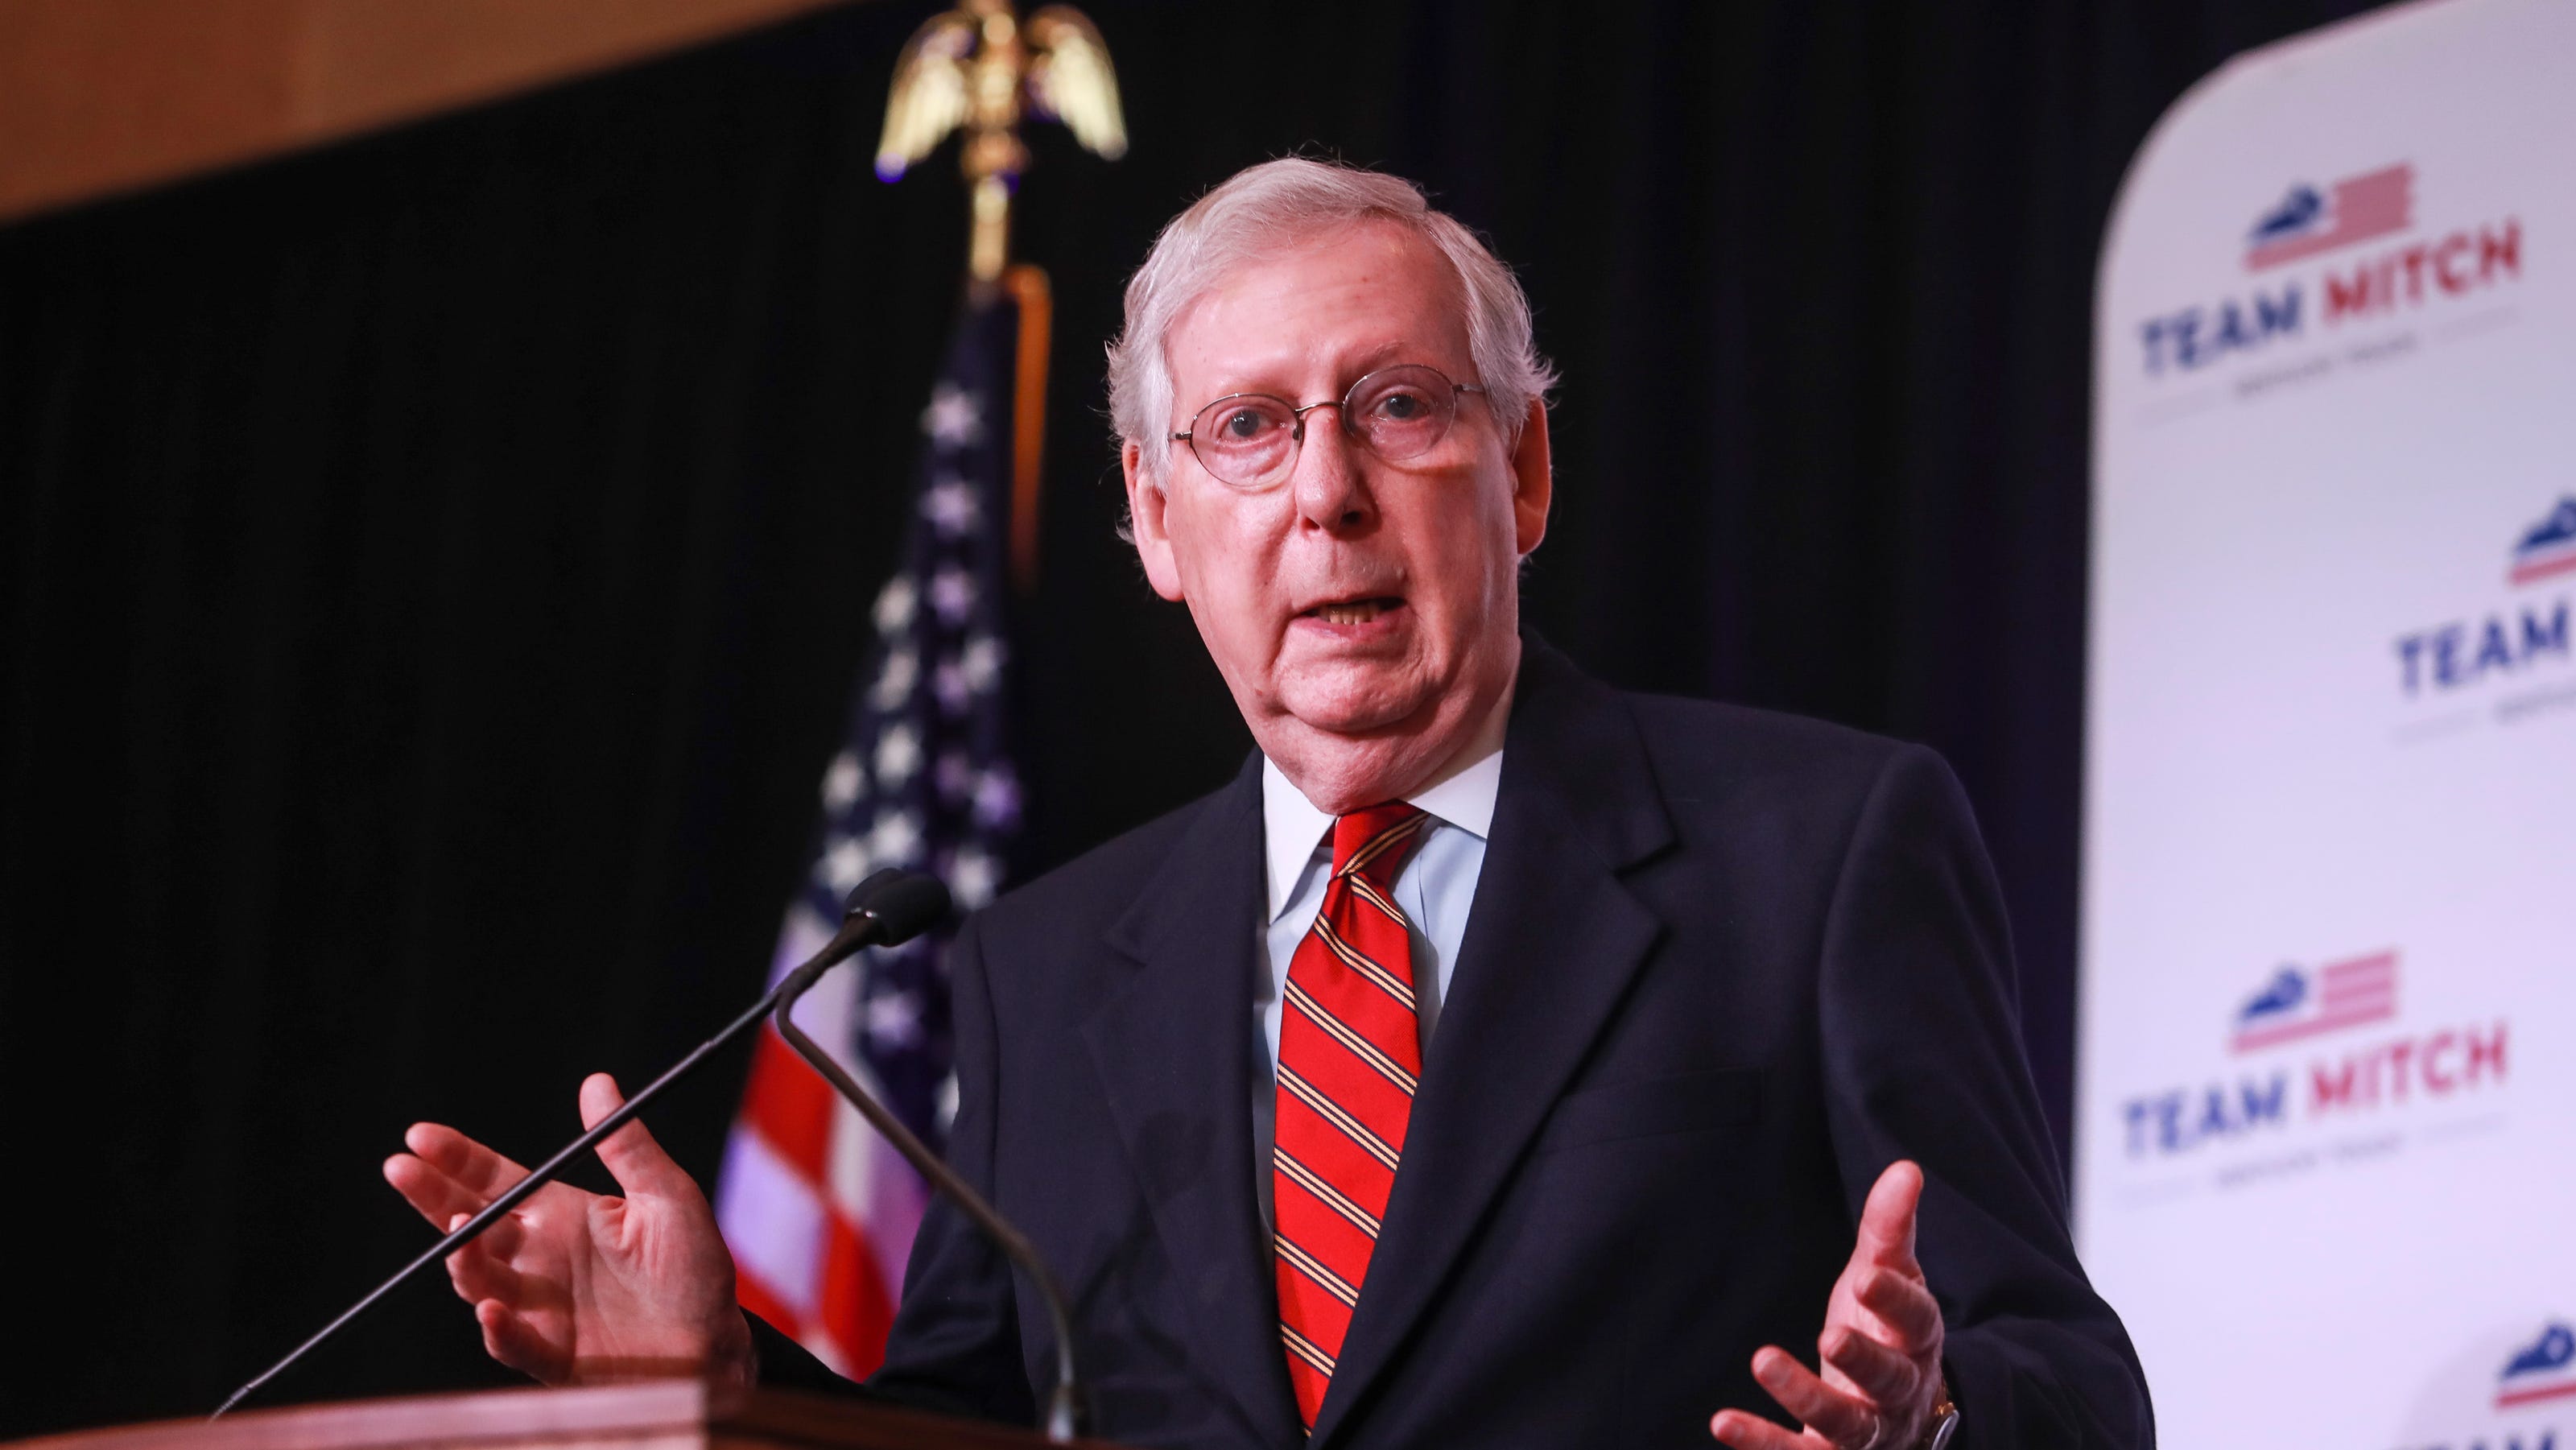 Mitch McConnell's 2020 Senate race proves his popularity in Kentucky